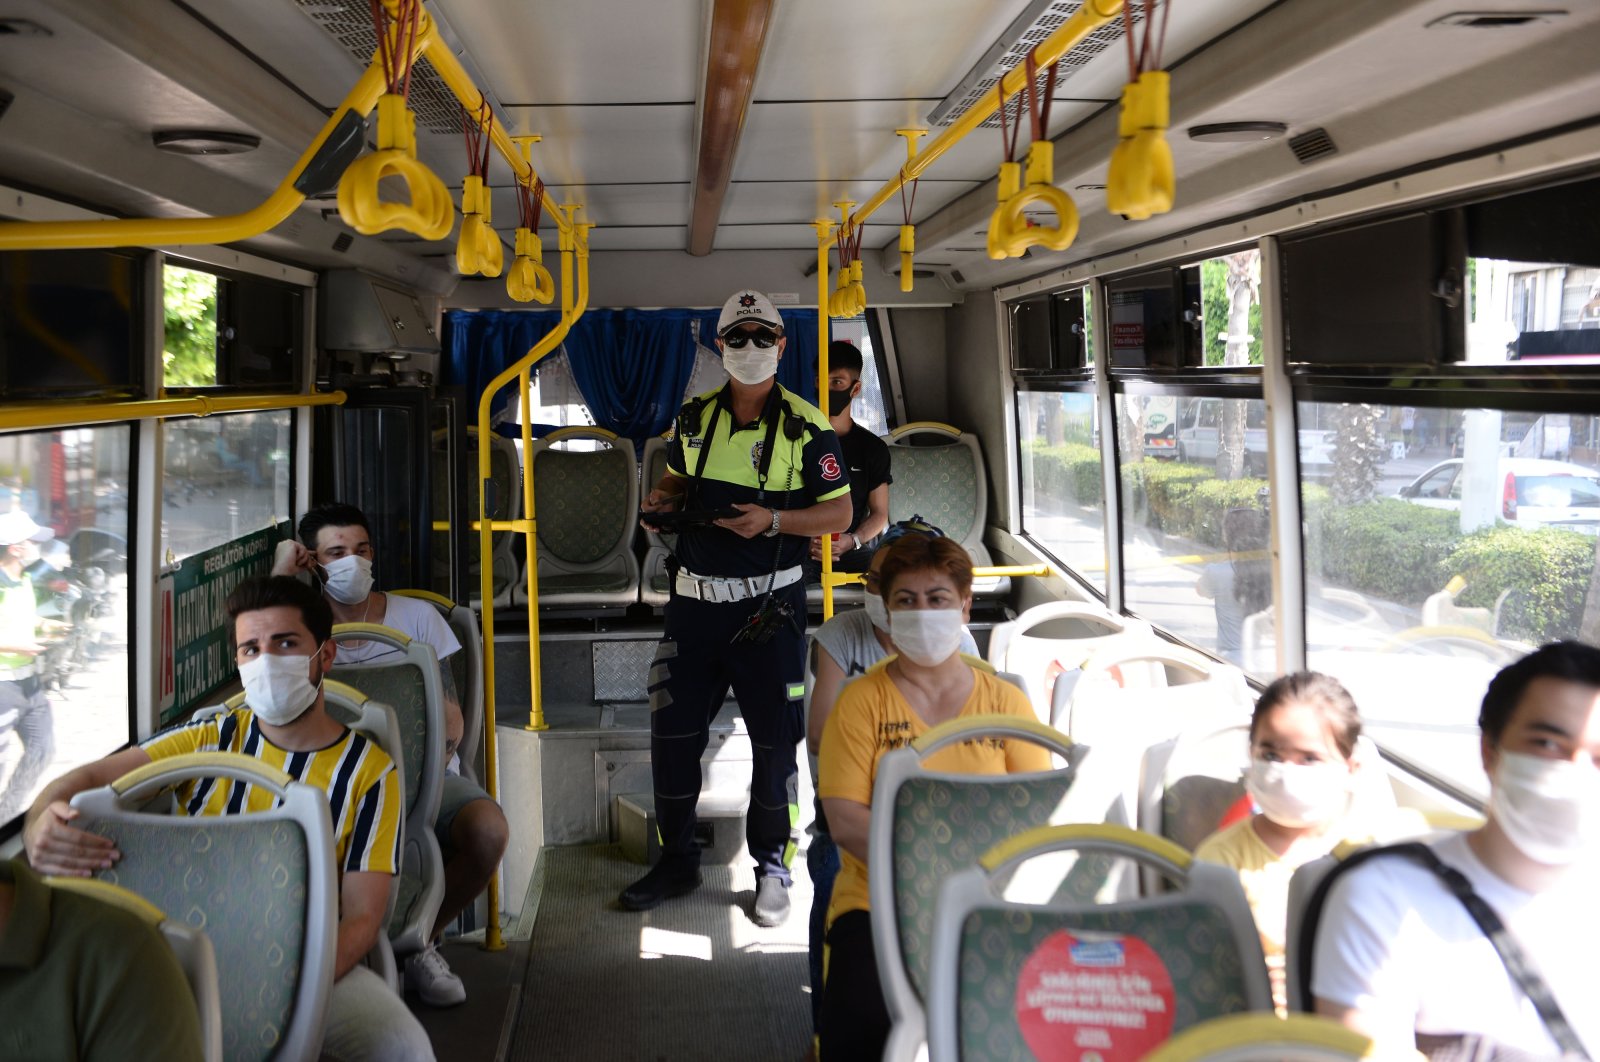 A police officer inspects coronavirus measures in a bus, in Adana, southern Turkey, Aug. 4, 2020. (DHA Photo)